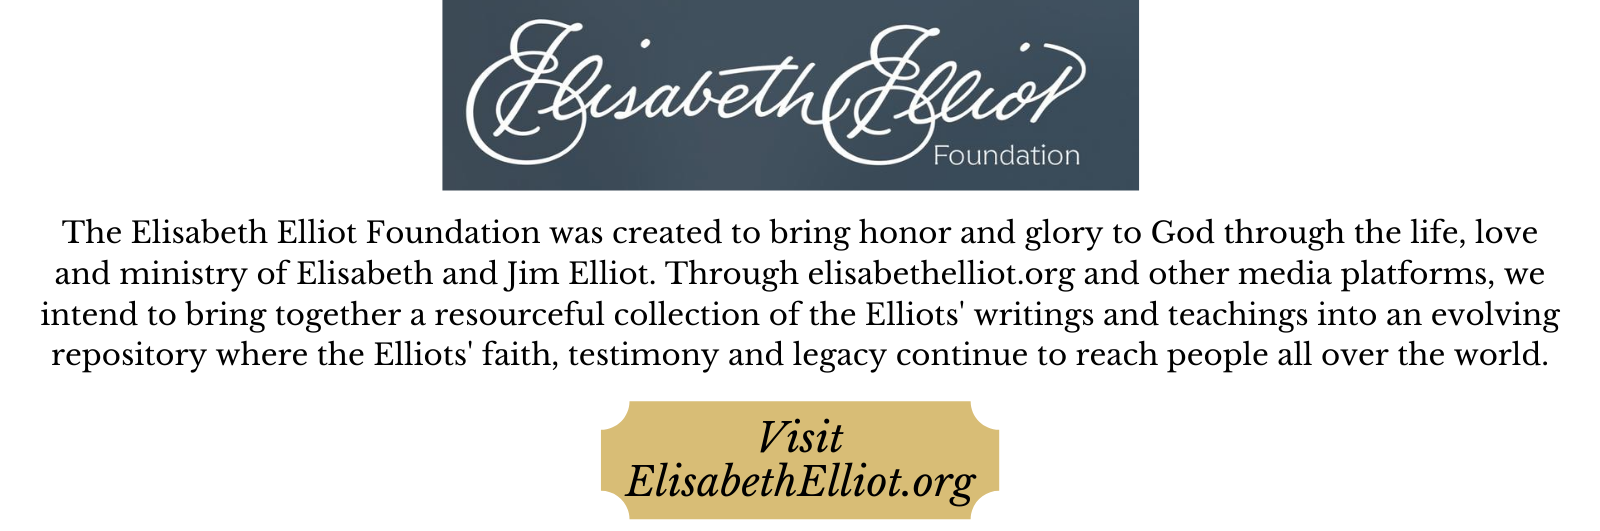 The Elisabeth Elliot Foundation was created to bring honor and glory through the life, love, and ministry of Elisabeth and Jim Elliot. Through ElisabethElliot.org and other media platforms, we intend to bring together a resourceful collection of the Elliots' writings and teachings into an evolving repository where the Elliots' faith, testimony, and legacy continue to reach people all over the world. Visit ElisabethElliot.org